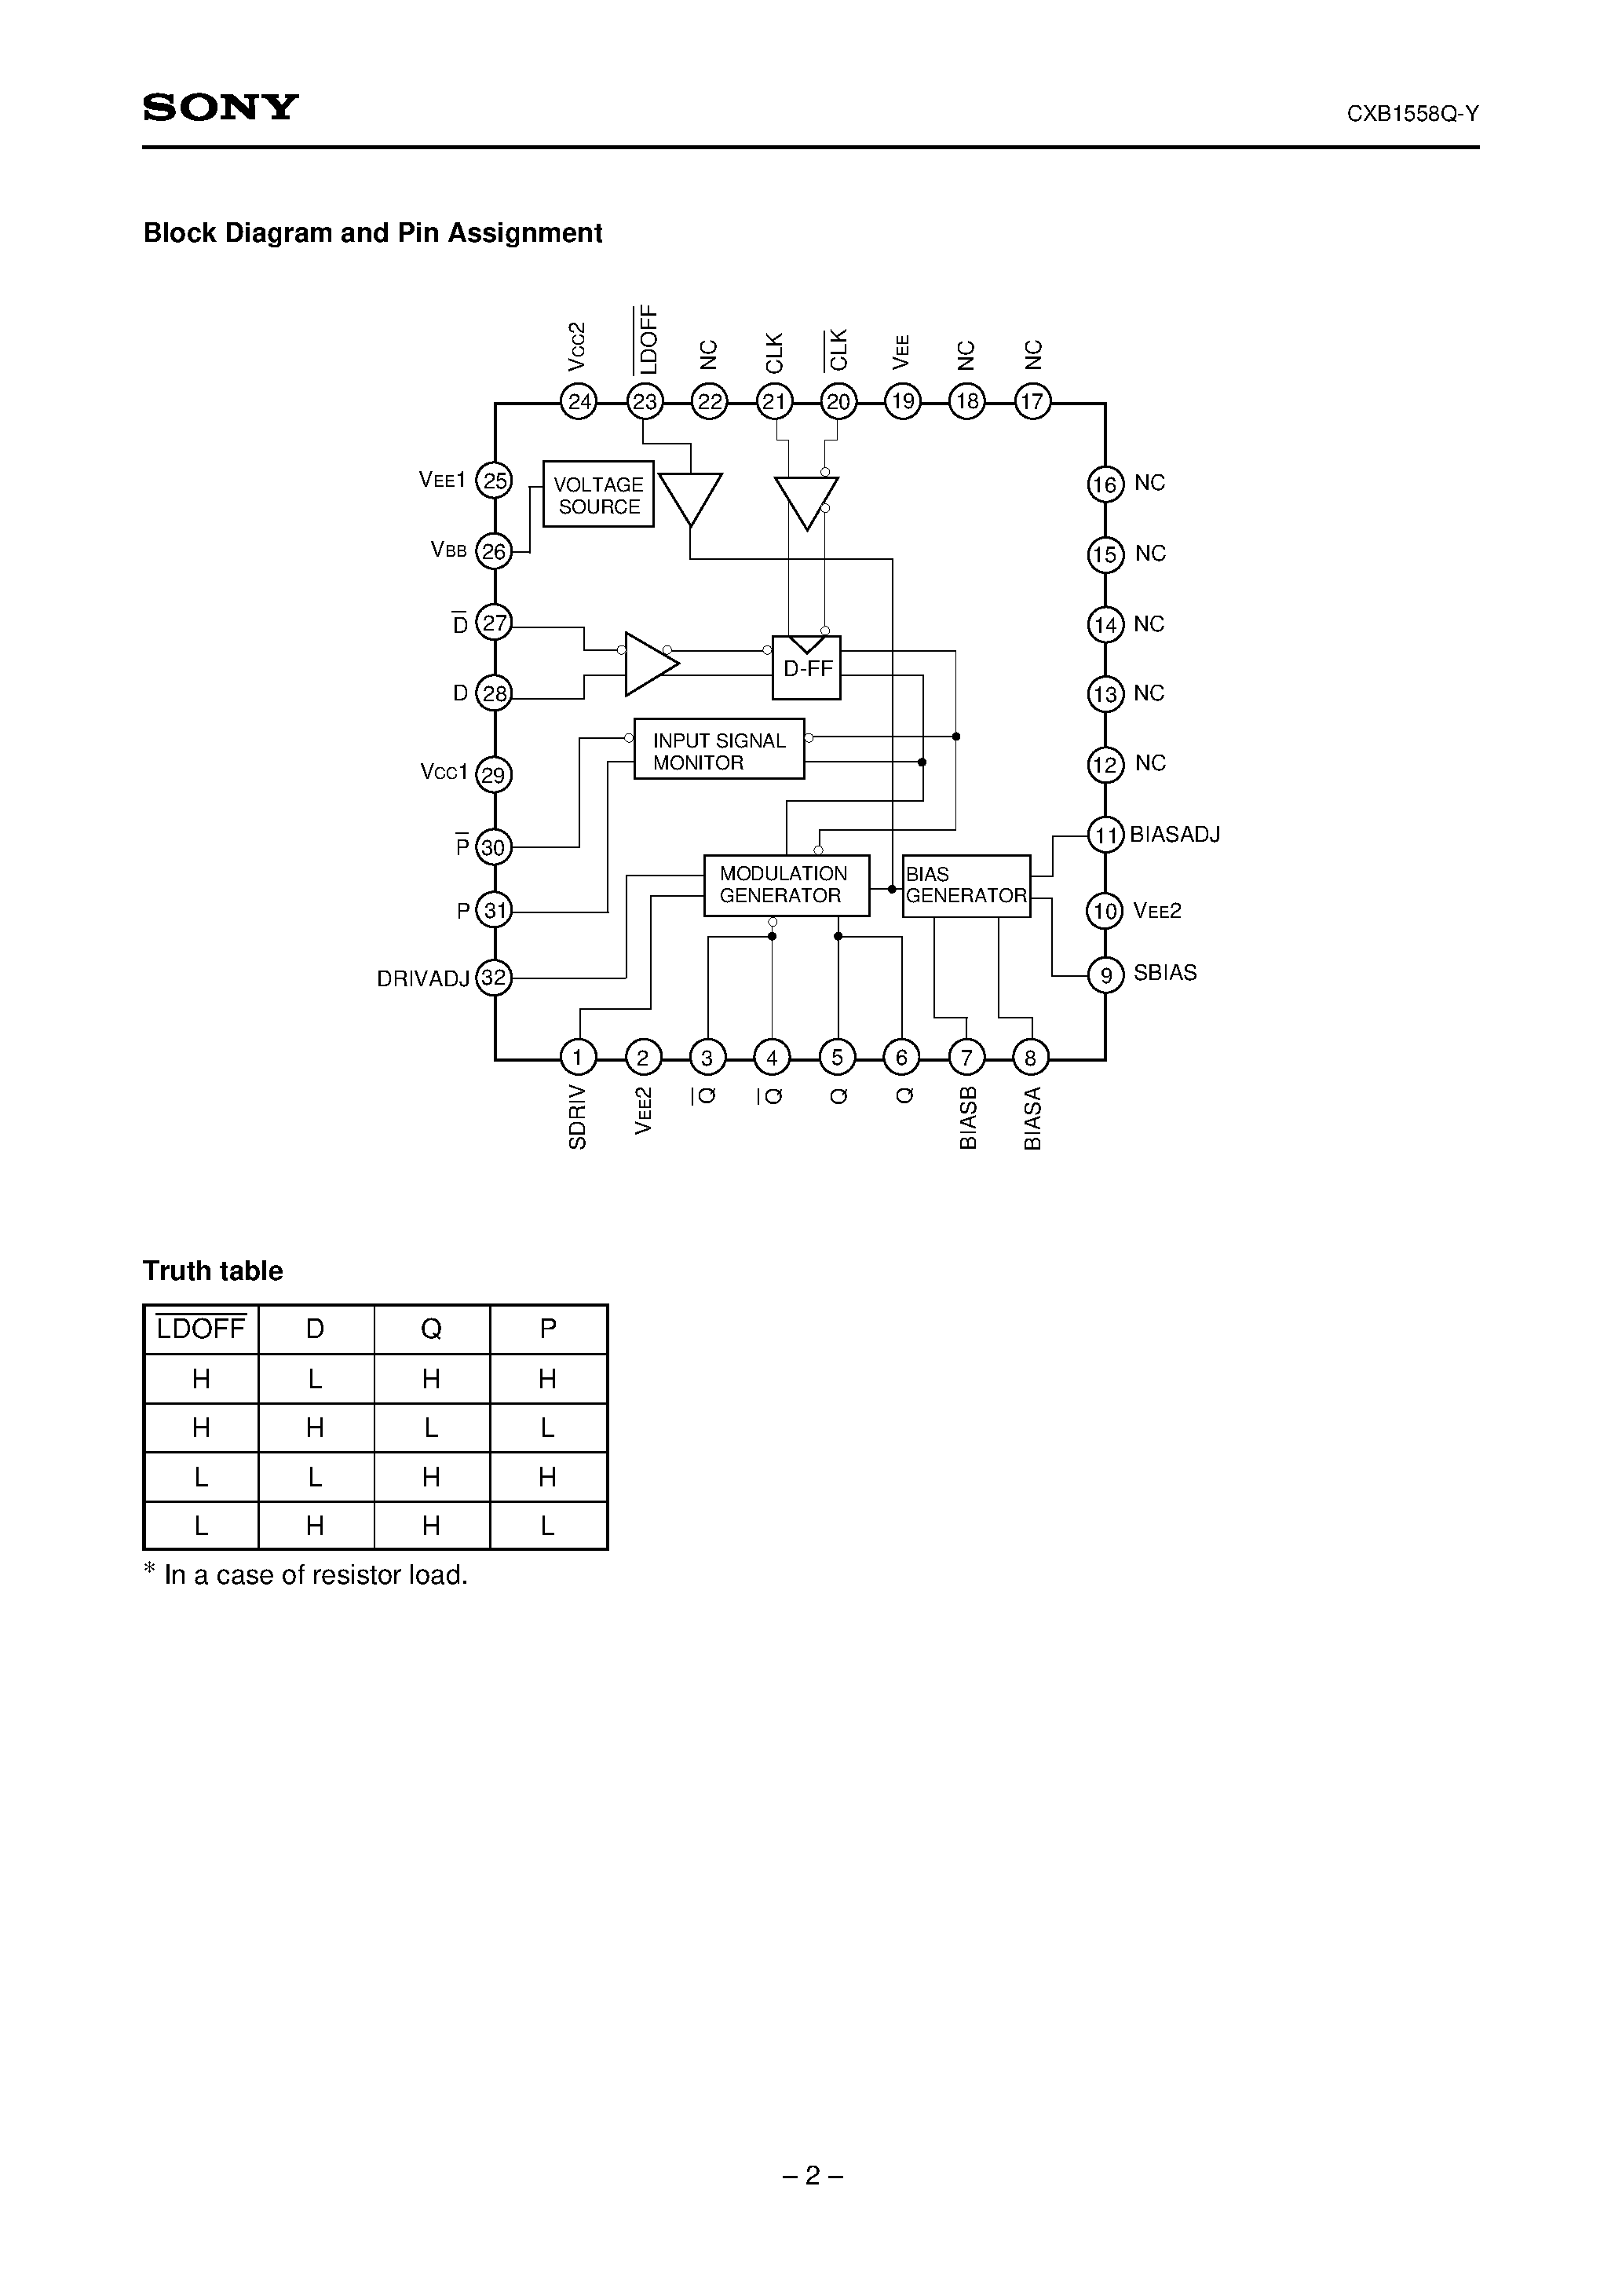 Datasheet CXB1558Q-Y - Laser Driver page 2